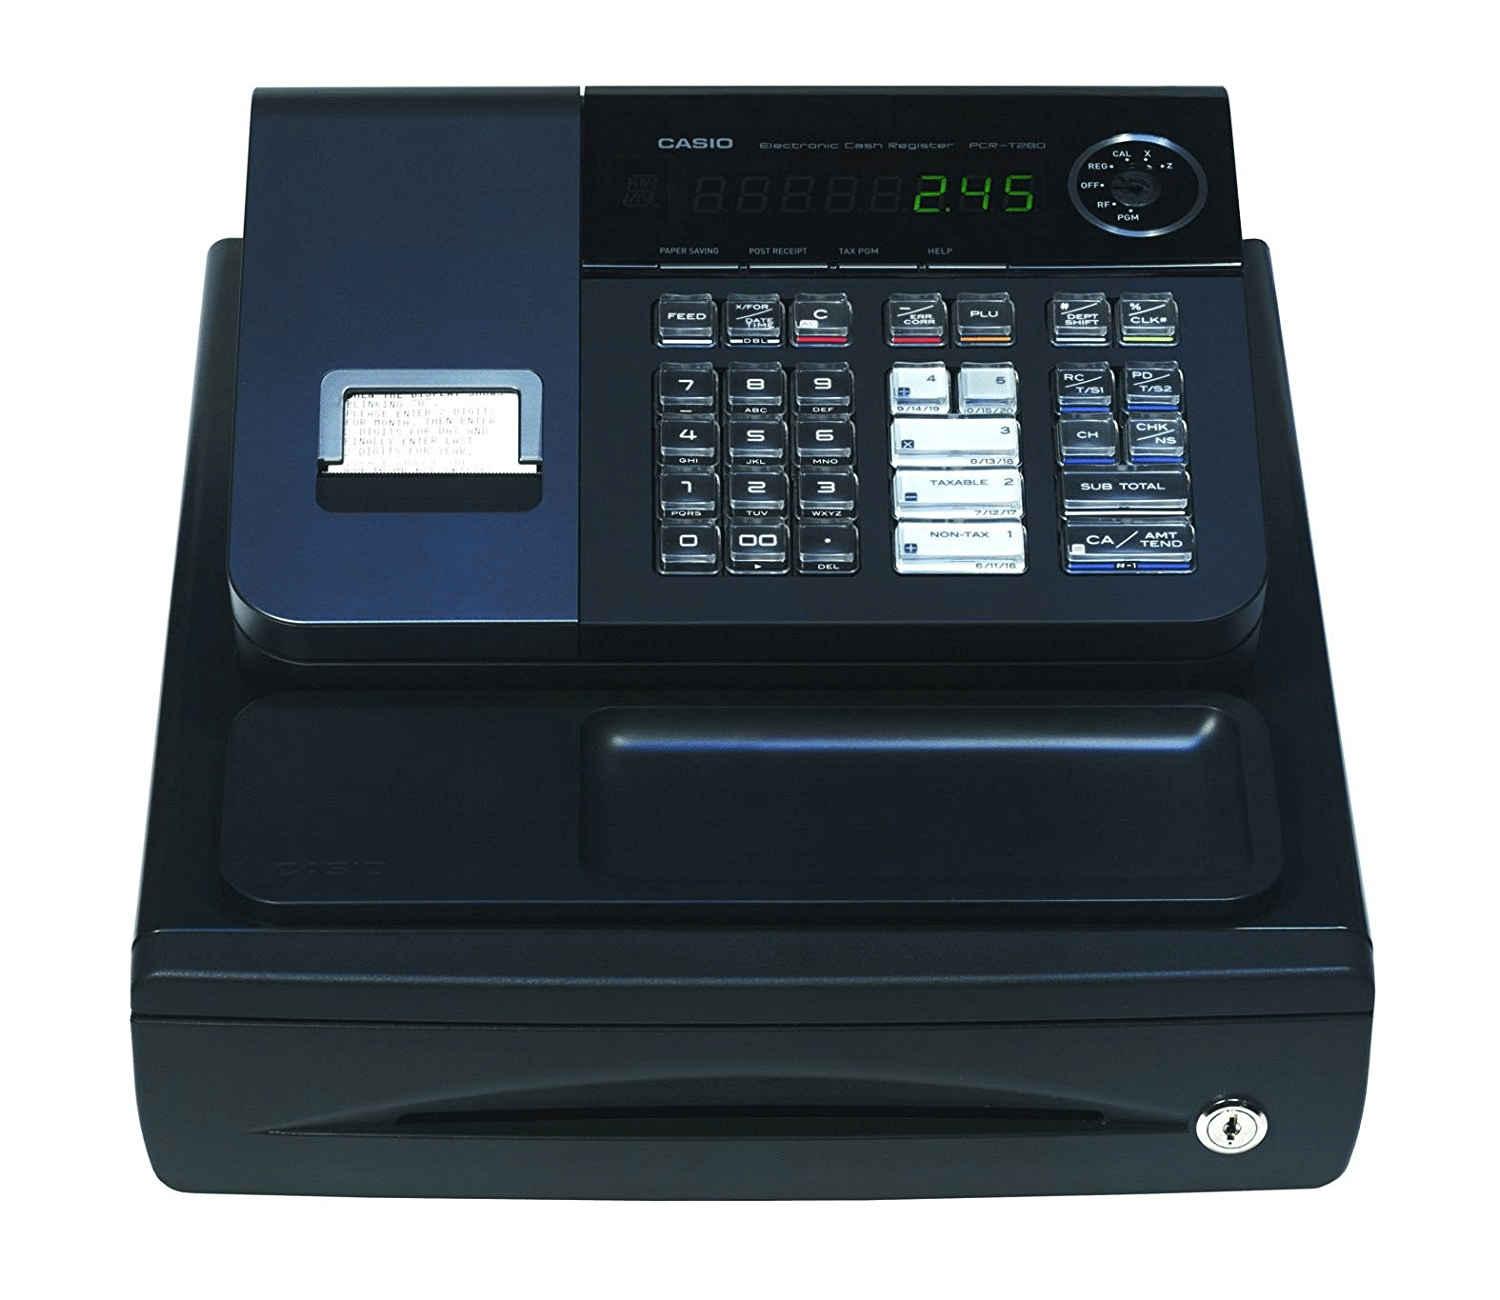 POS Cash Register - when a basic cash register is all you need